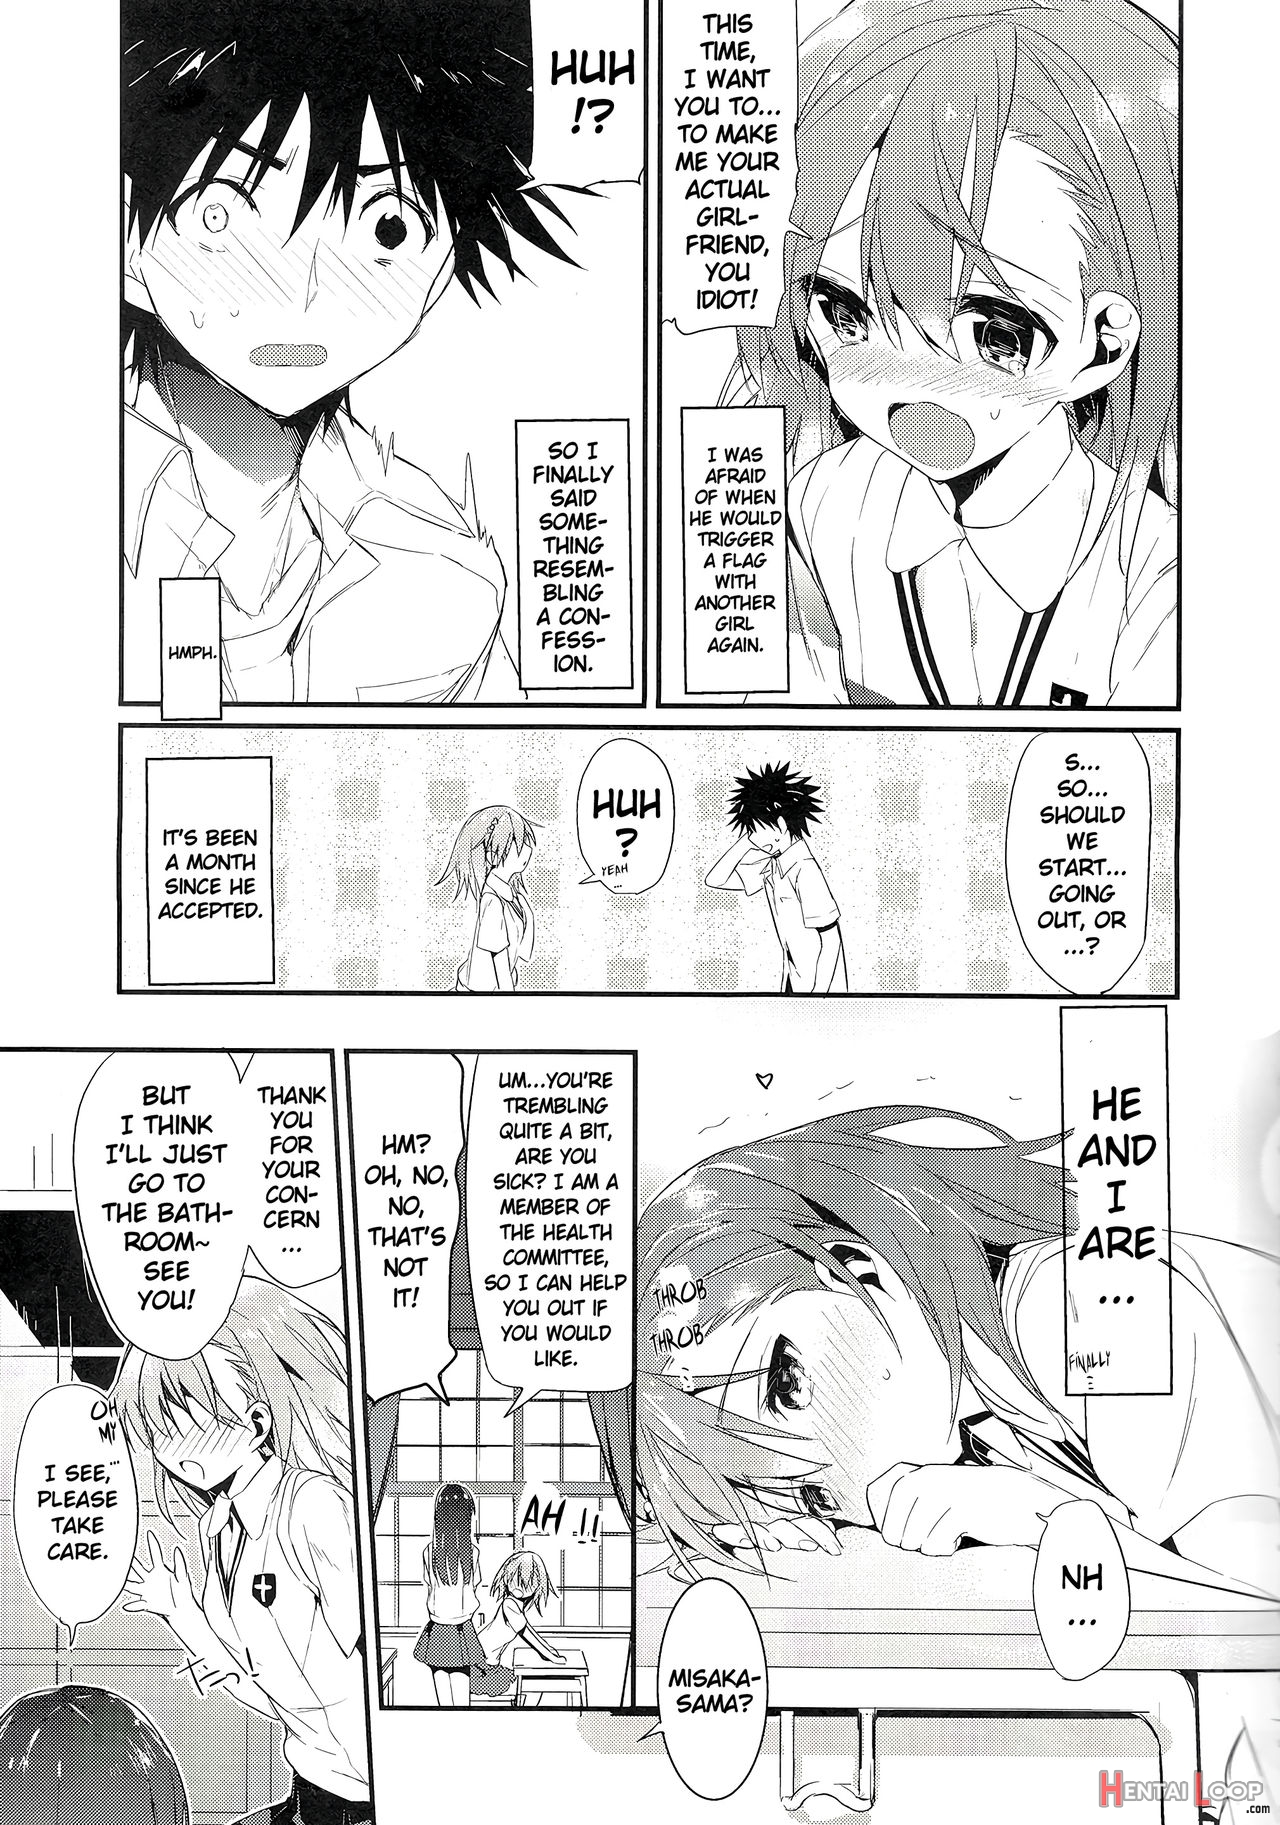 With Mikoto. 5 page 5